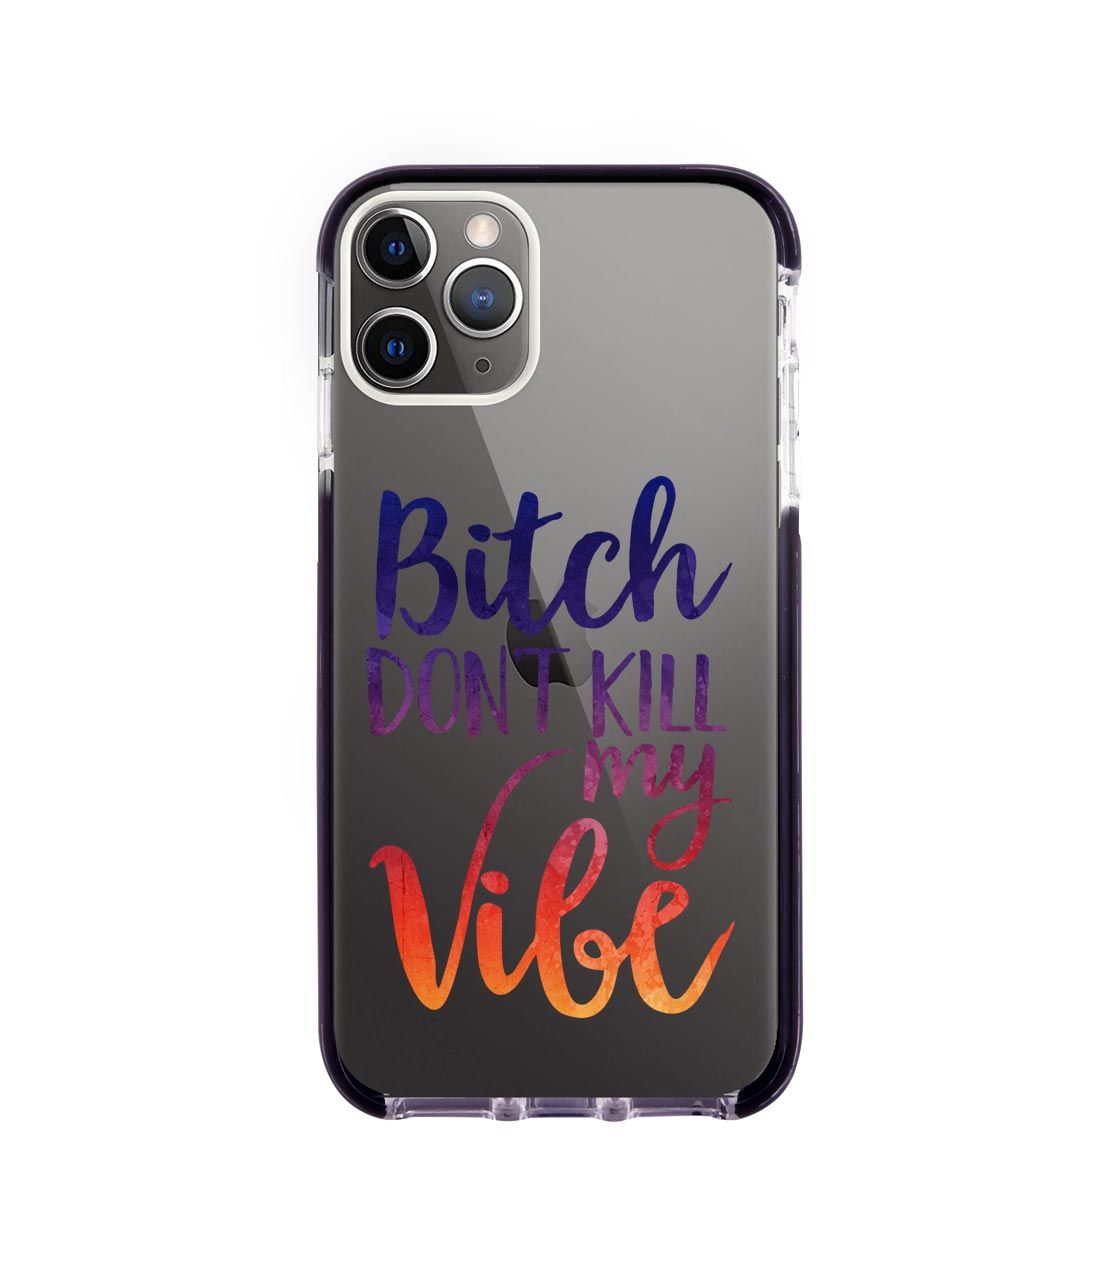 Dont kill my Vibe - Extreme Phone Case for iPhone 11 Pro